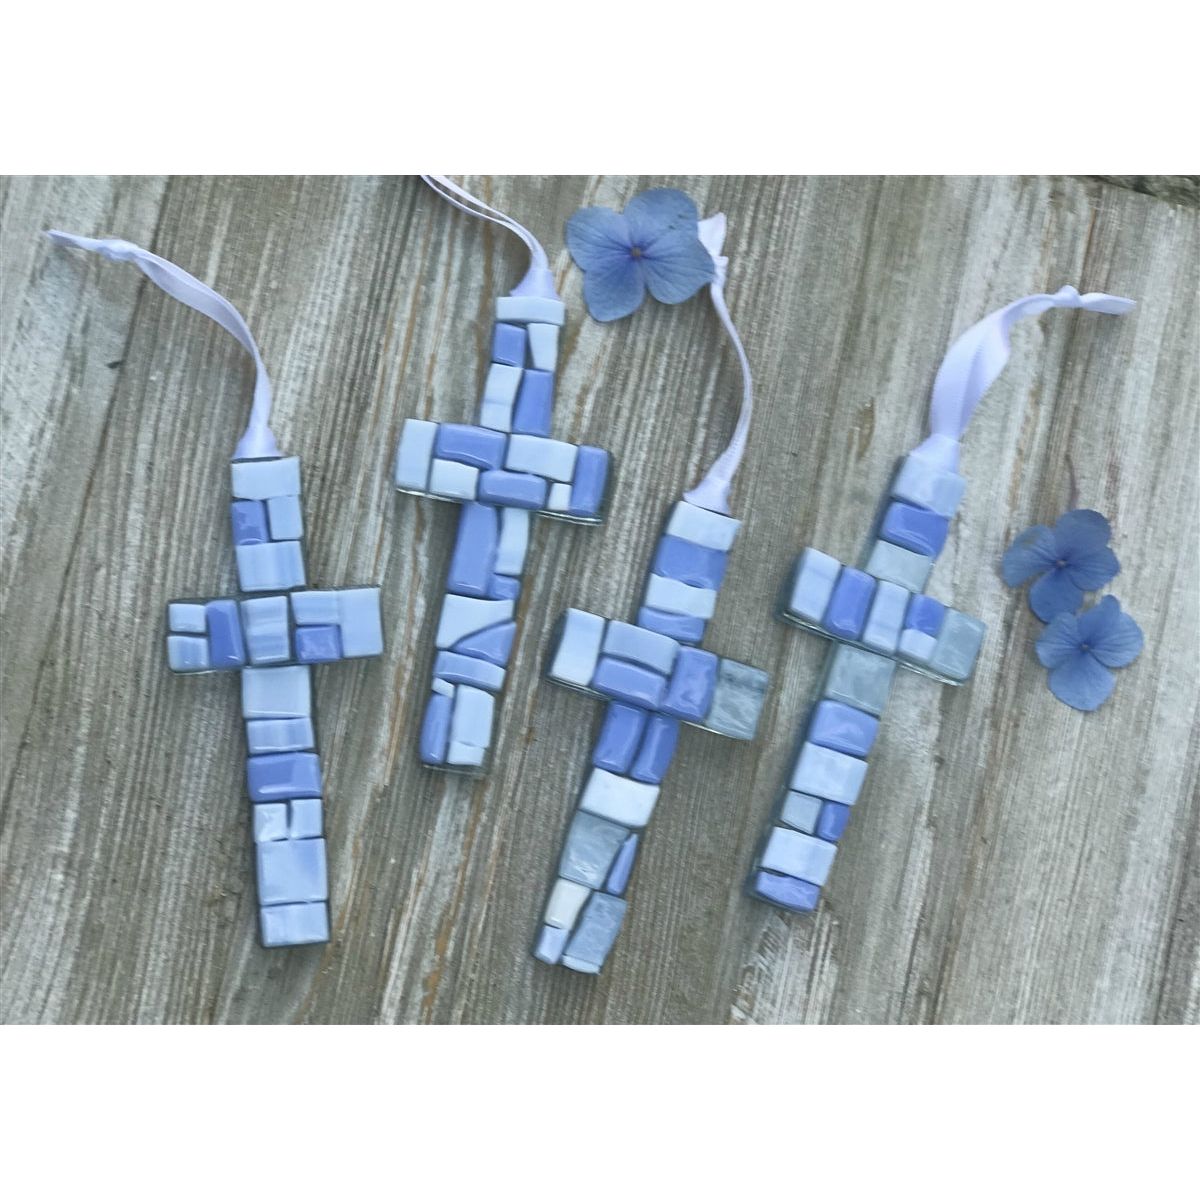 An assortment of blue mosaic crosses with varying shades of blue glass.